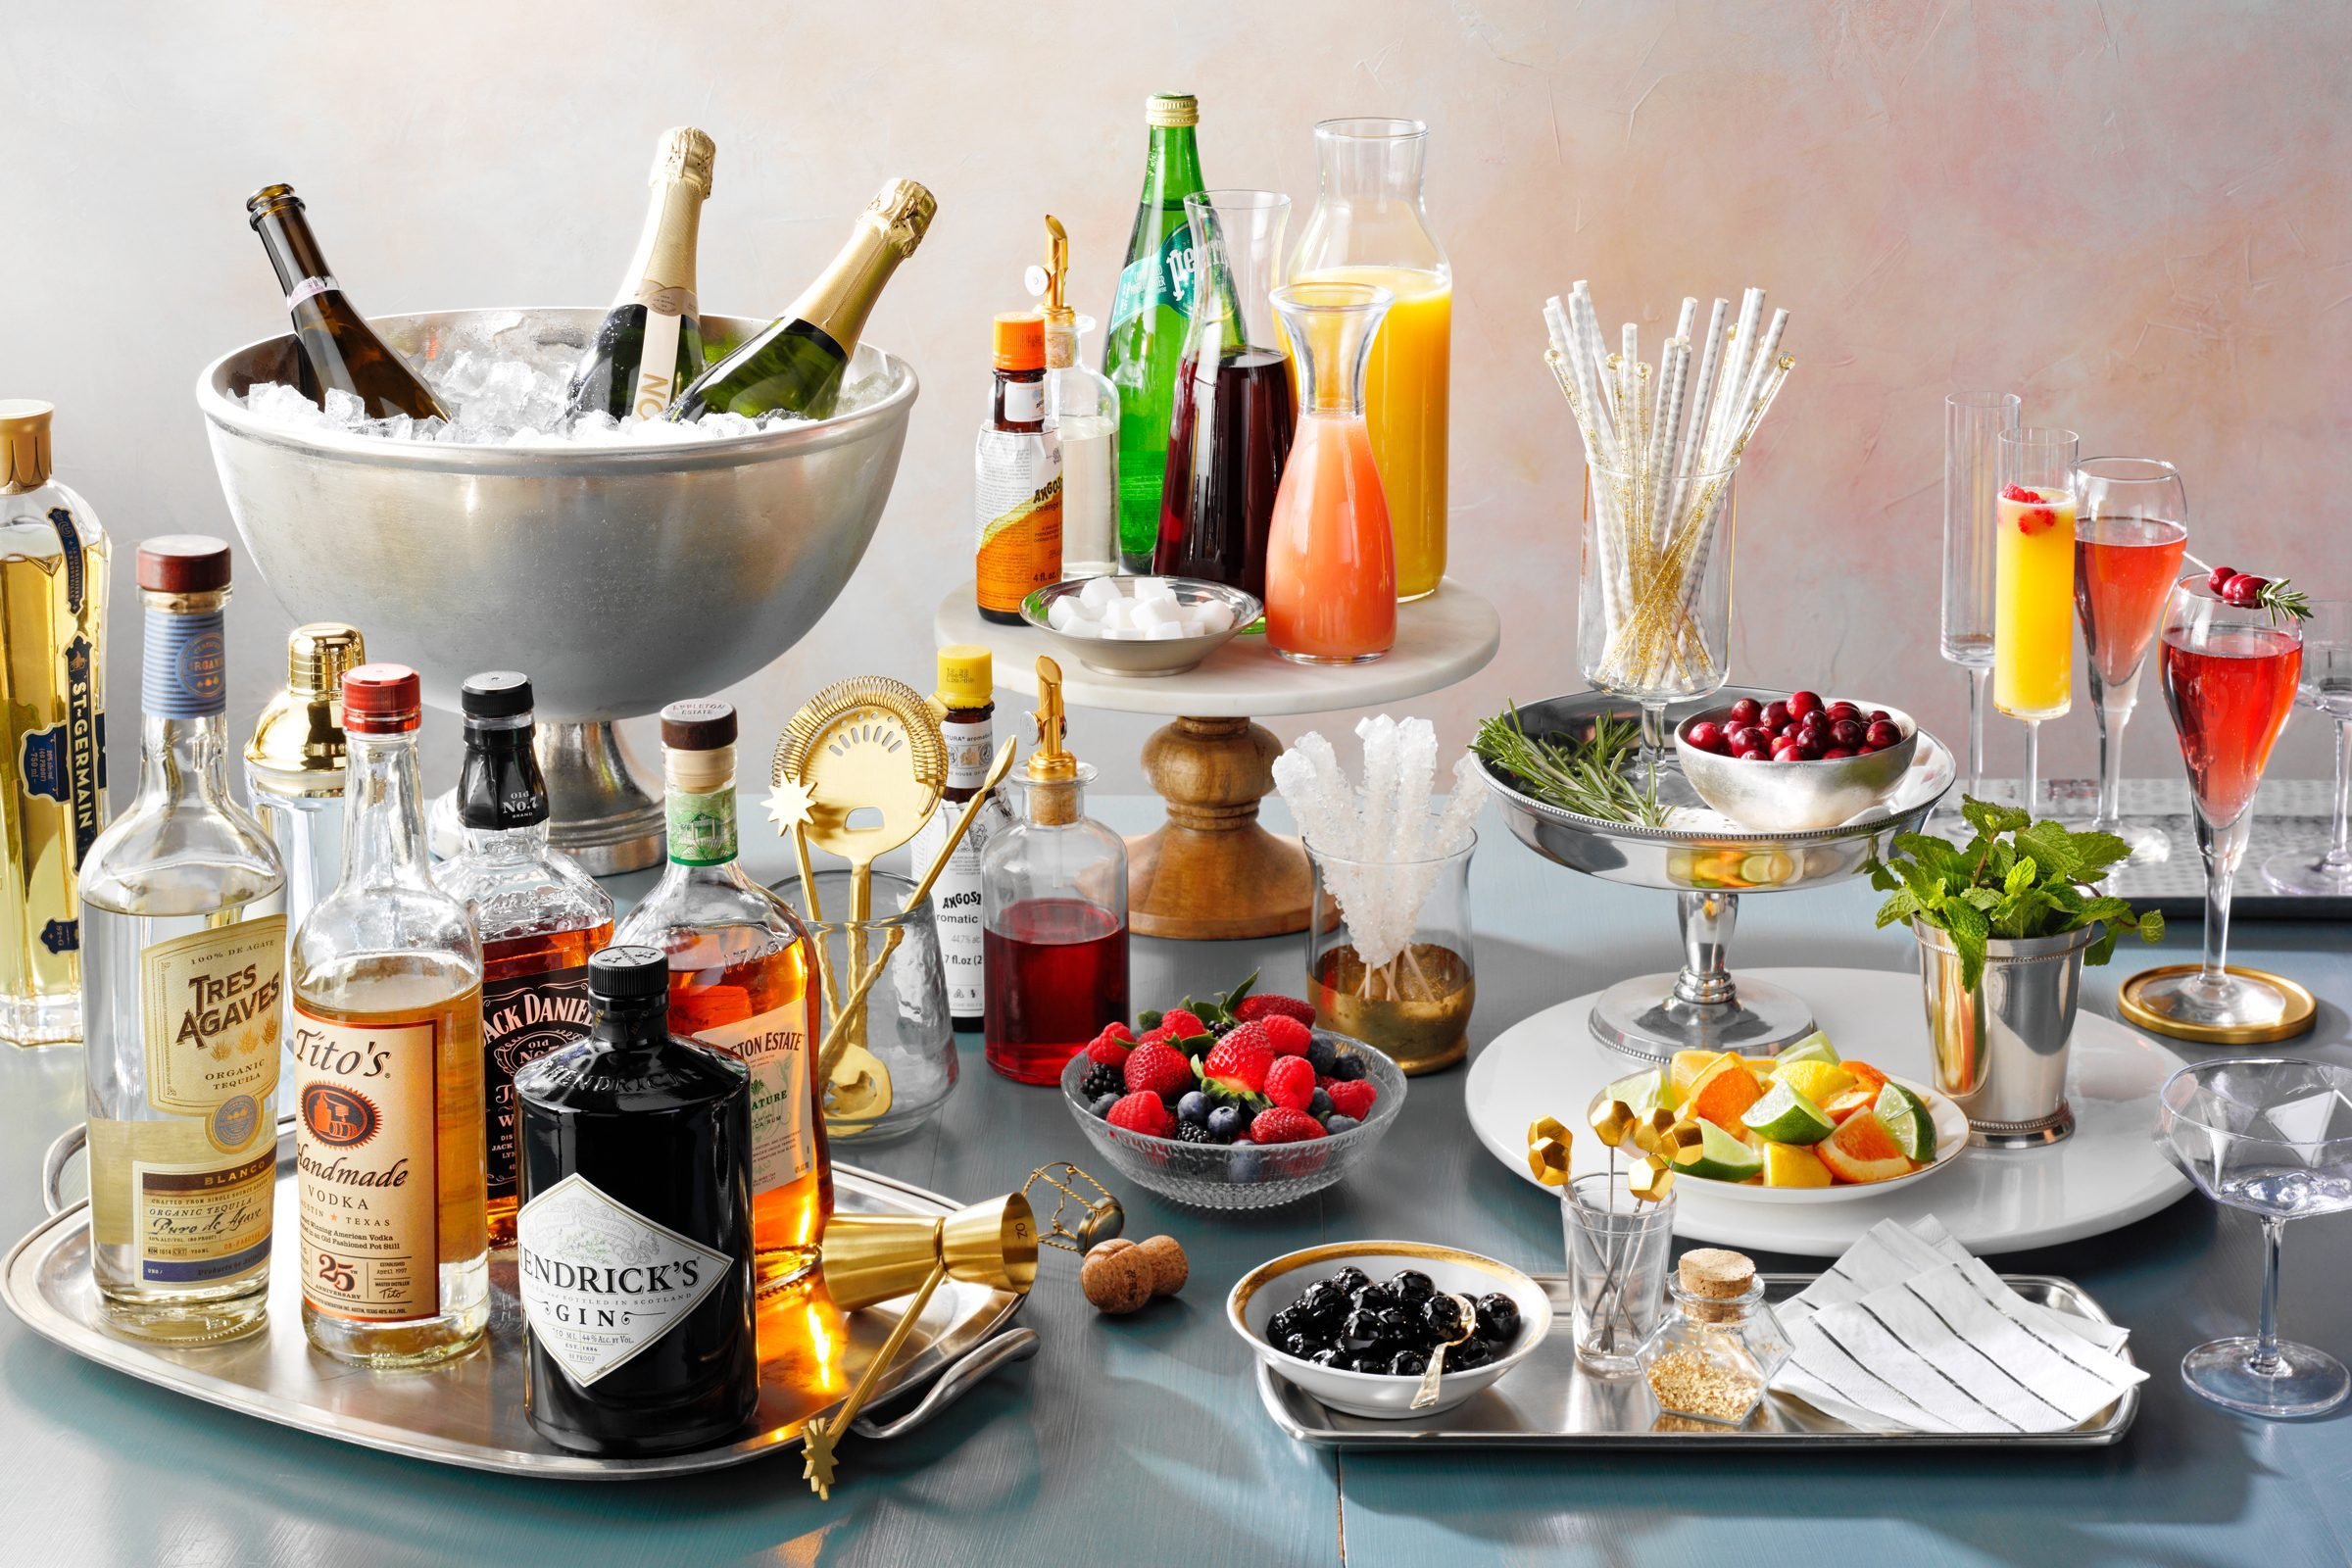 Mimosa Bar Party, Champagne Themed Party Supplies